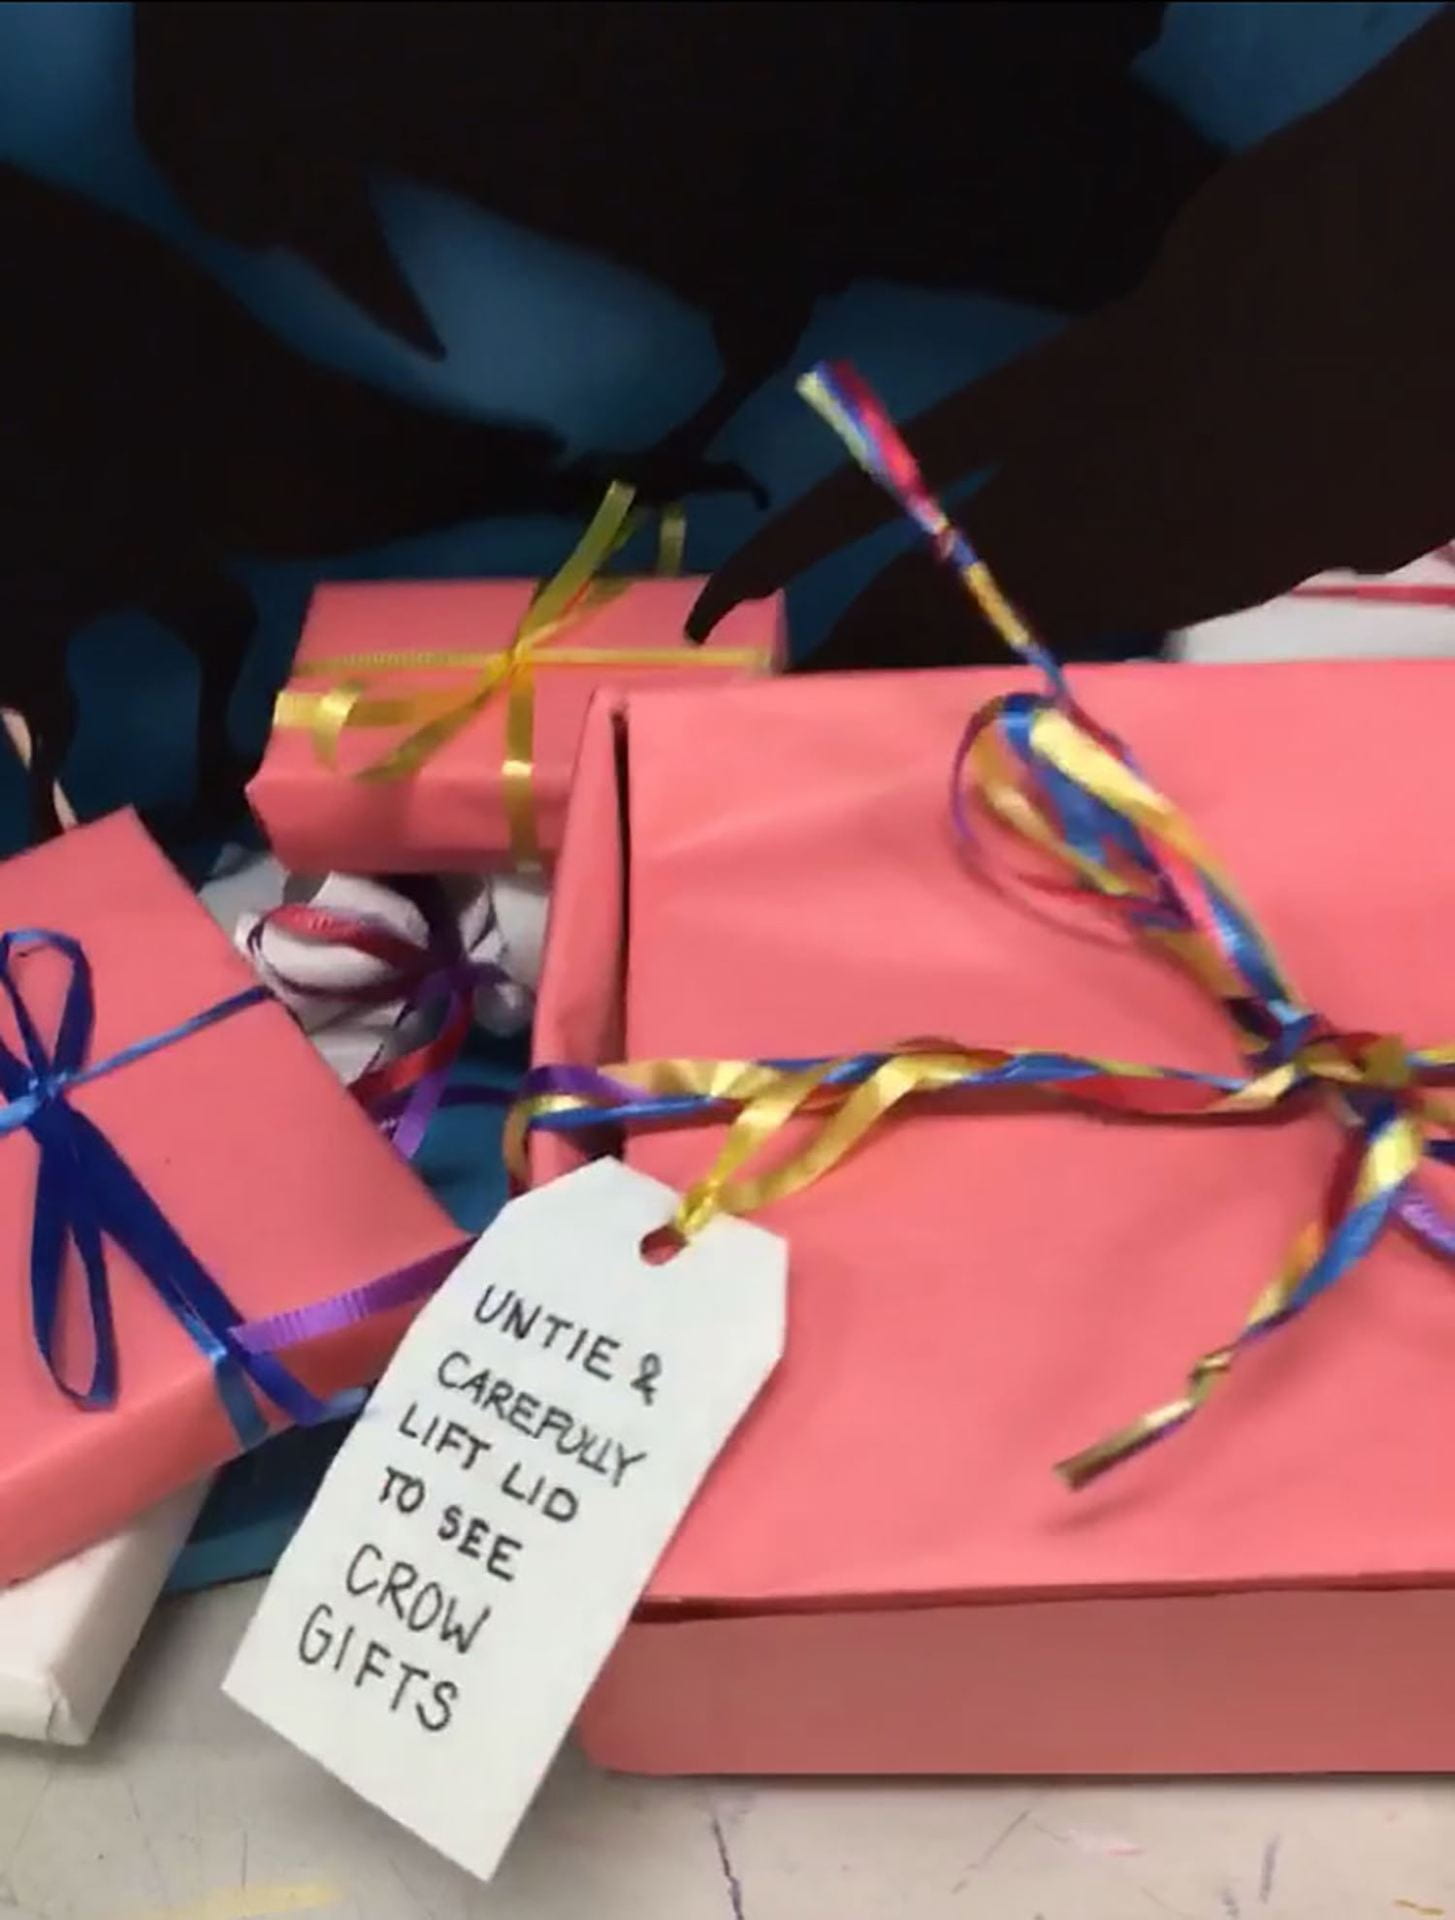 close-up of gift boxes with a tag labeled "untie & carefully lift lid to see crow gifts"